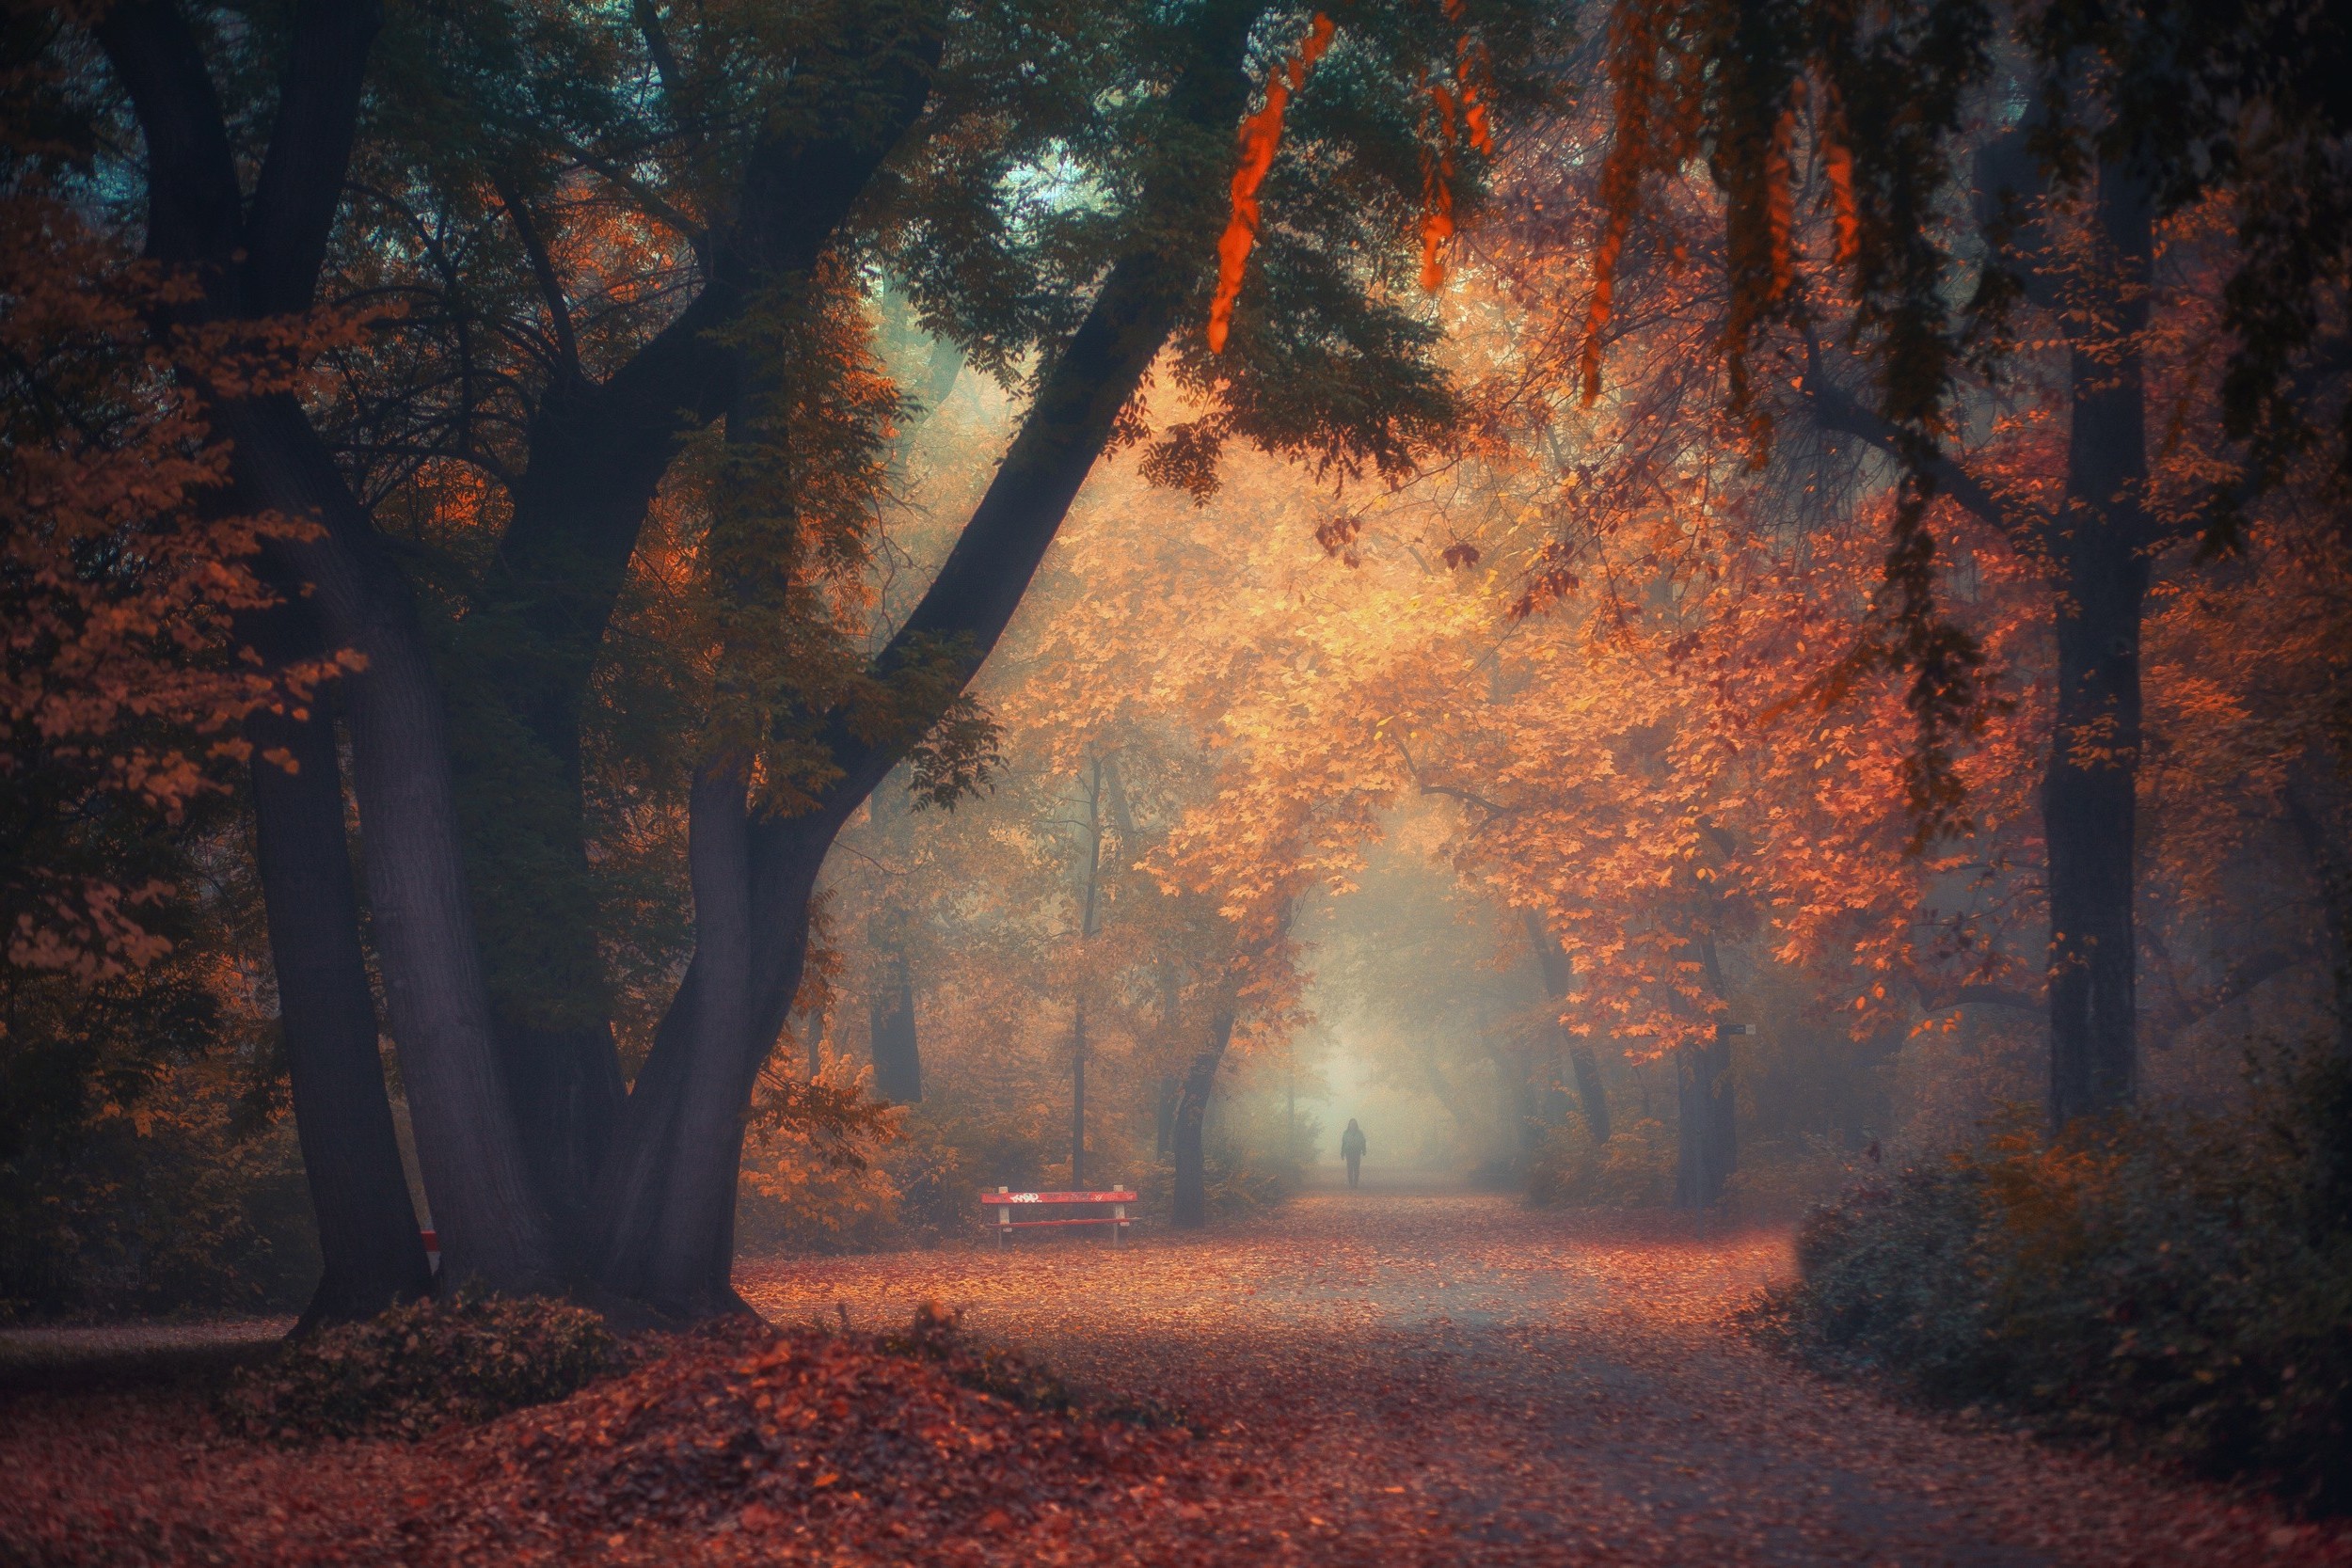 walking, Nature, Photography, Landscape, Park, Morning, Trees, Fall, Path, Bench, Leaves, Mist, Atmosphere, Netherlands Wallpaper